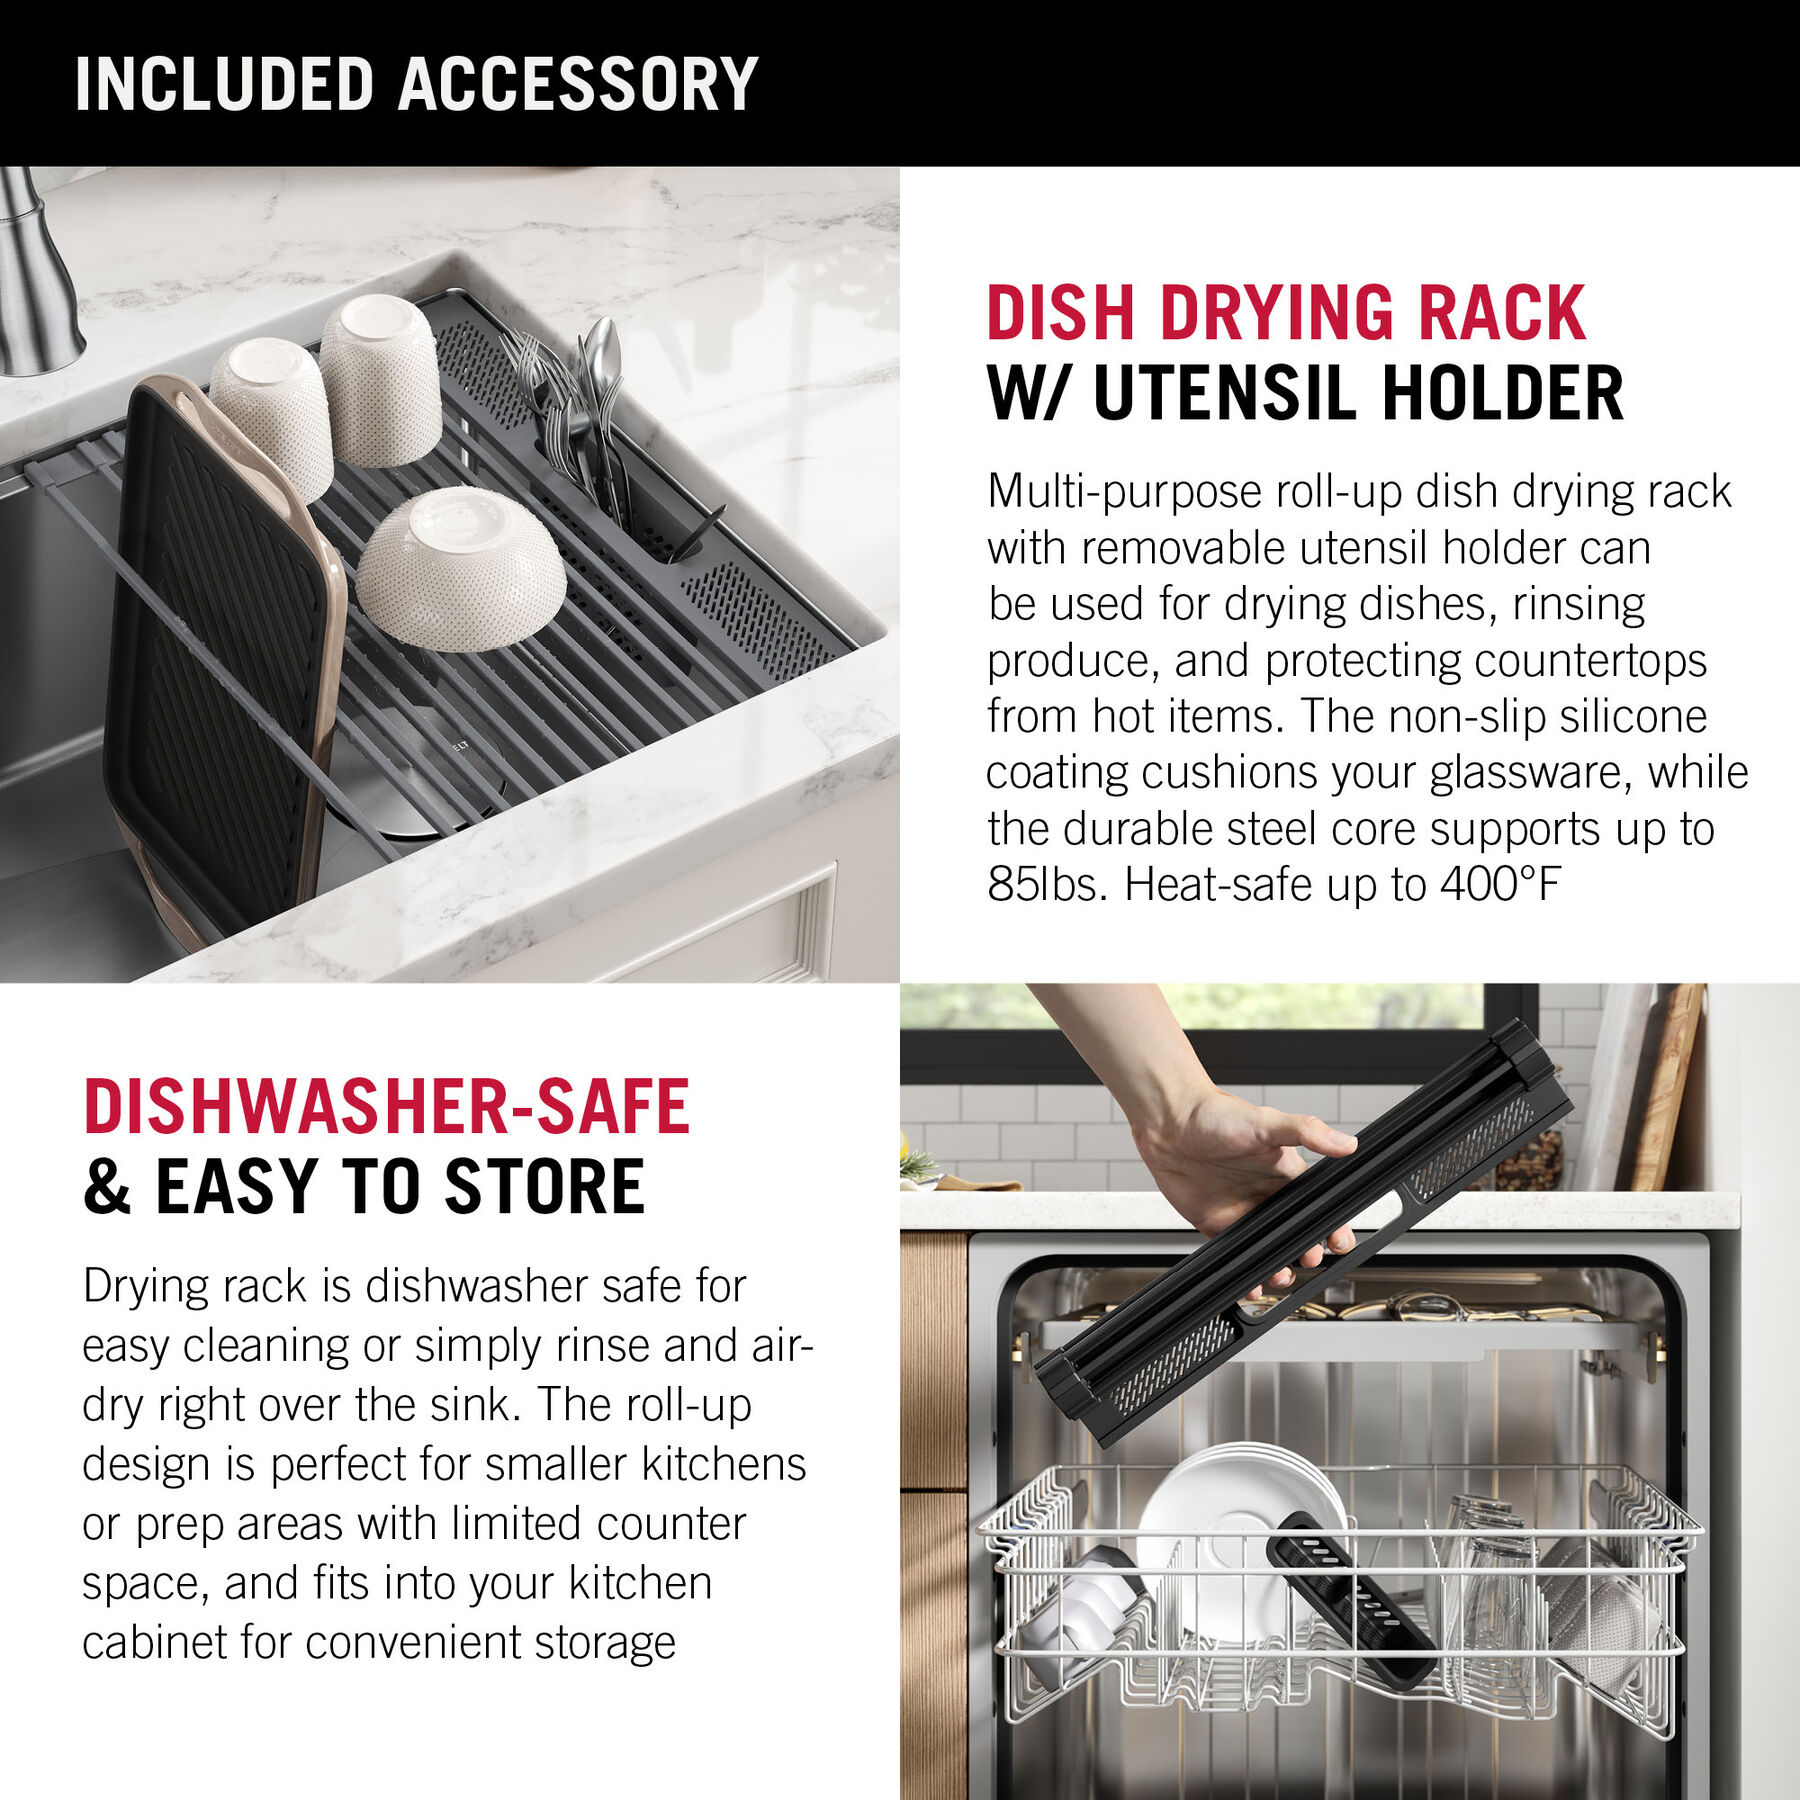 Why Over the Sink Dish Drying Rack is a hit Kitchen Accessory?